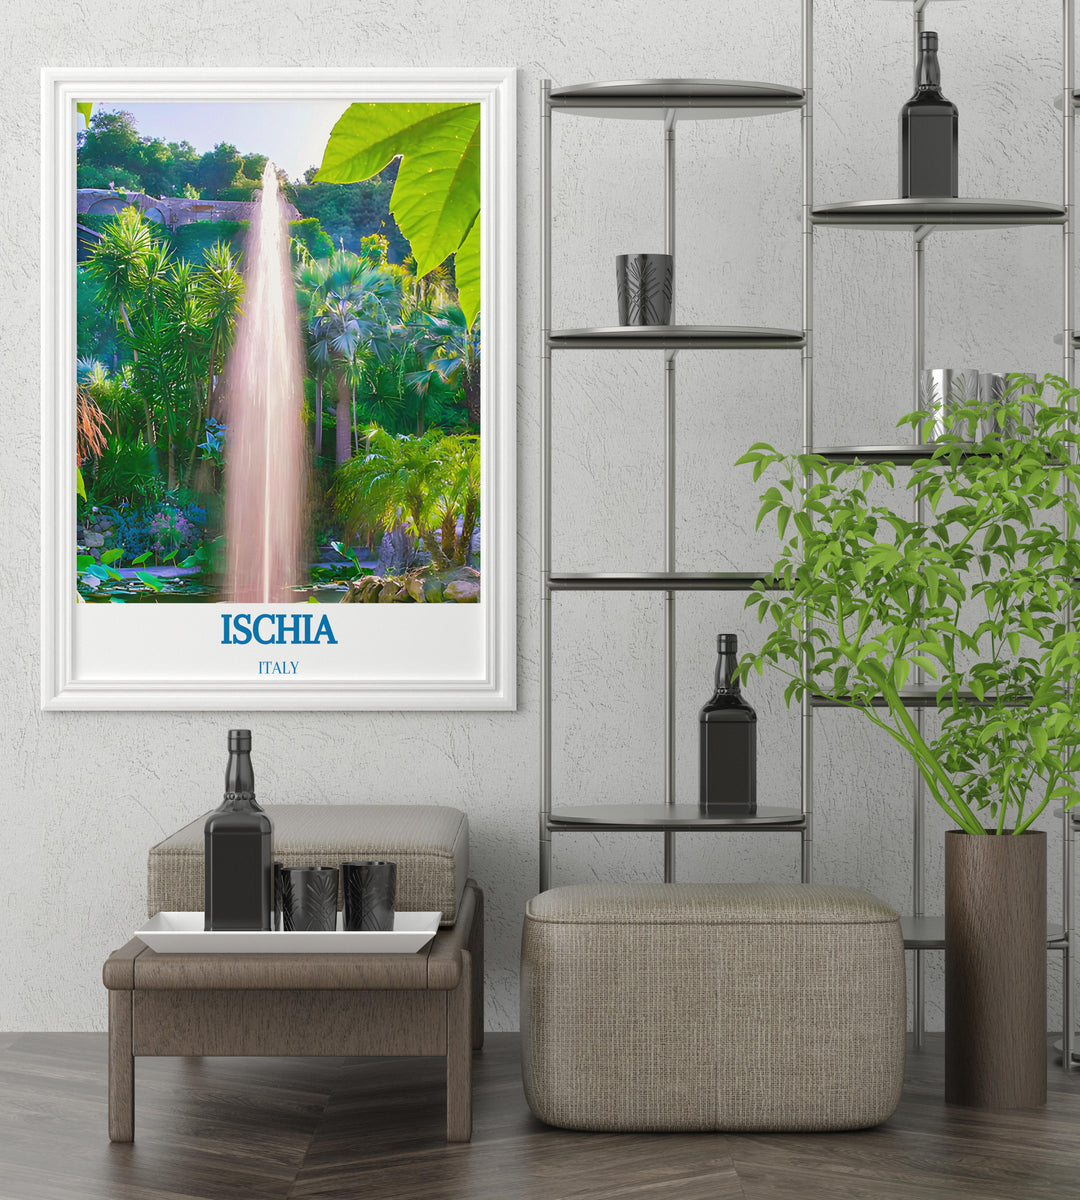 Wall art capturing the sunset over Ischias coastline providing a tranquil view for bedroom decoration